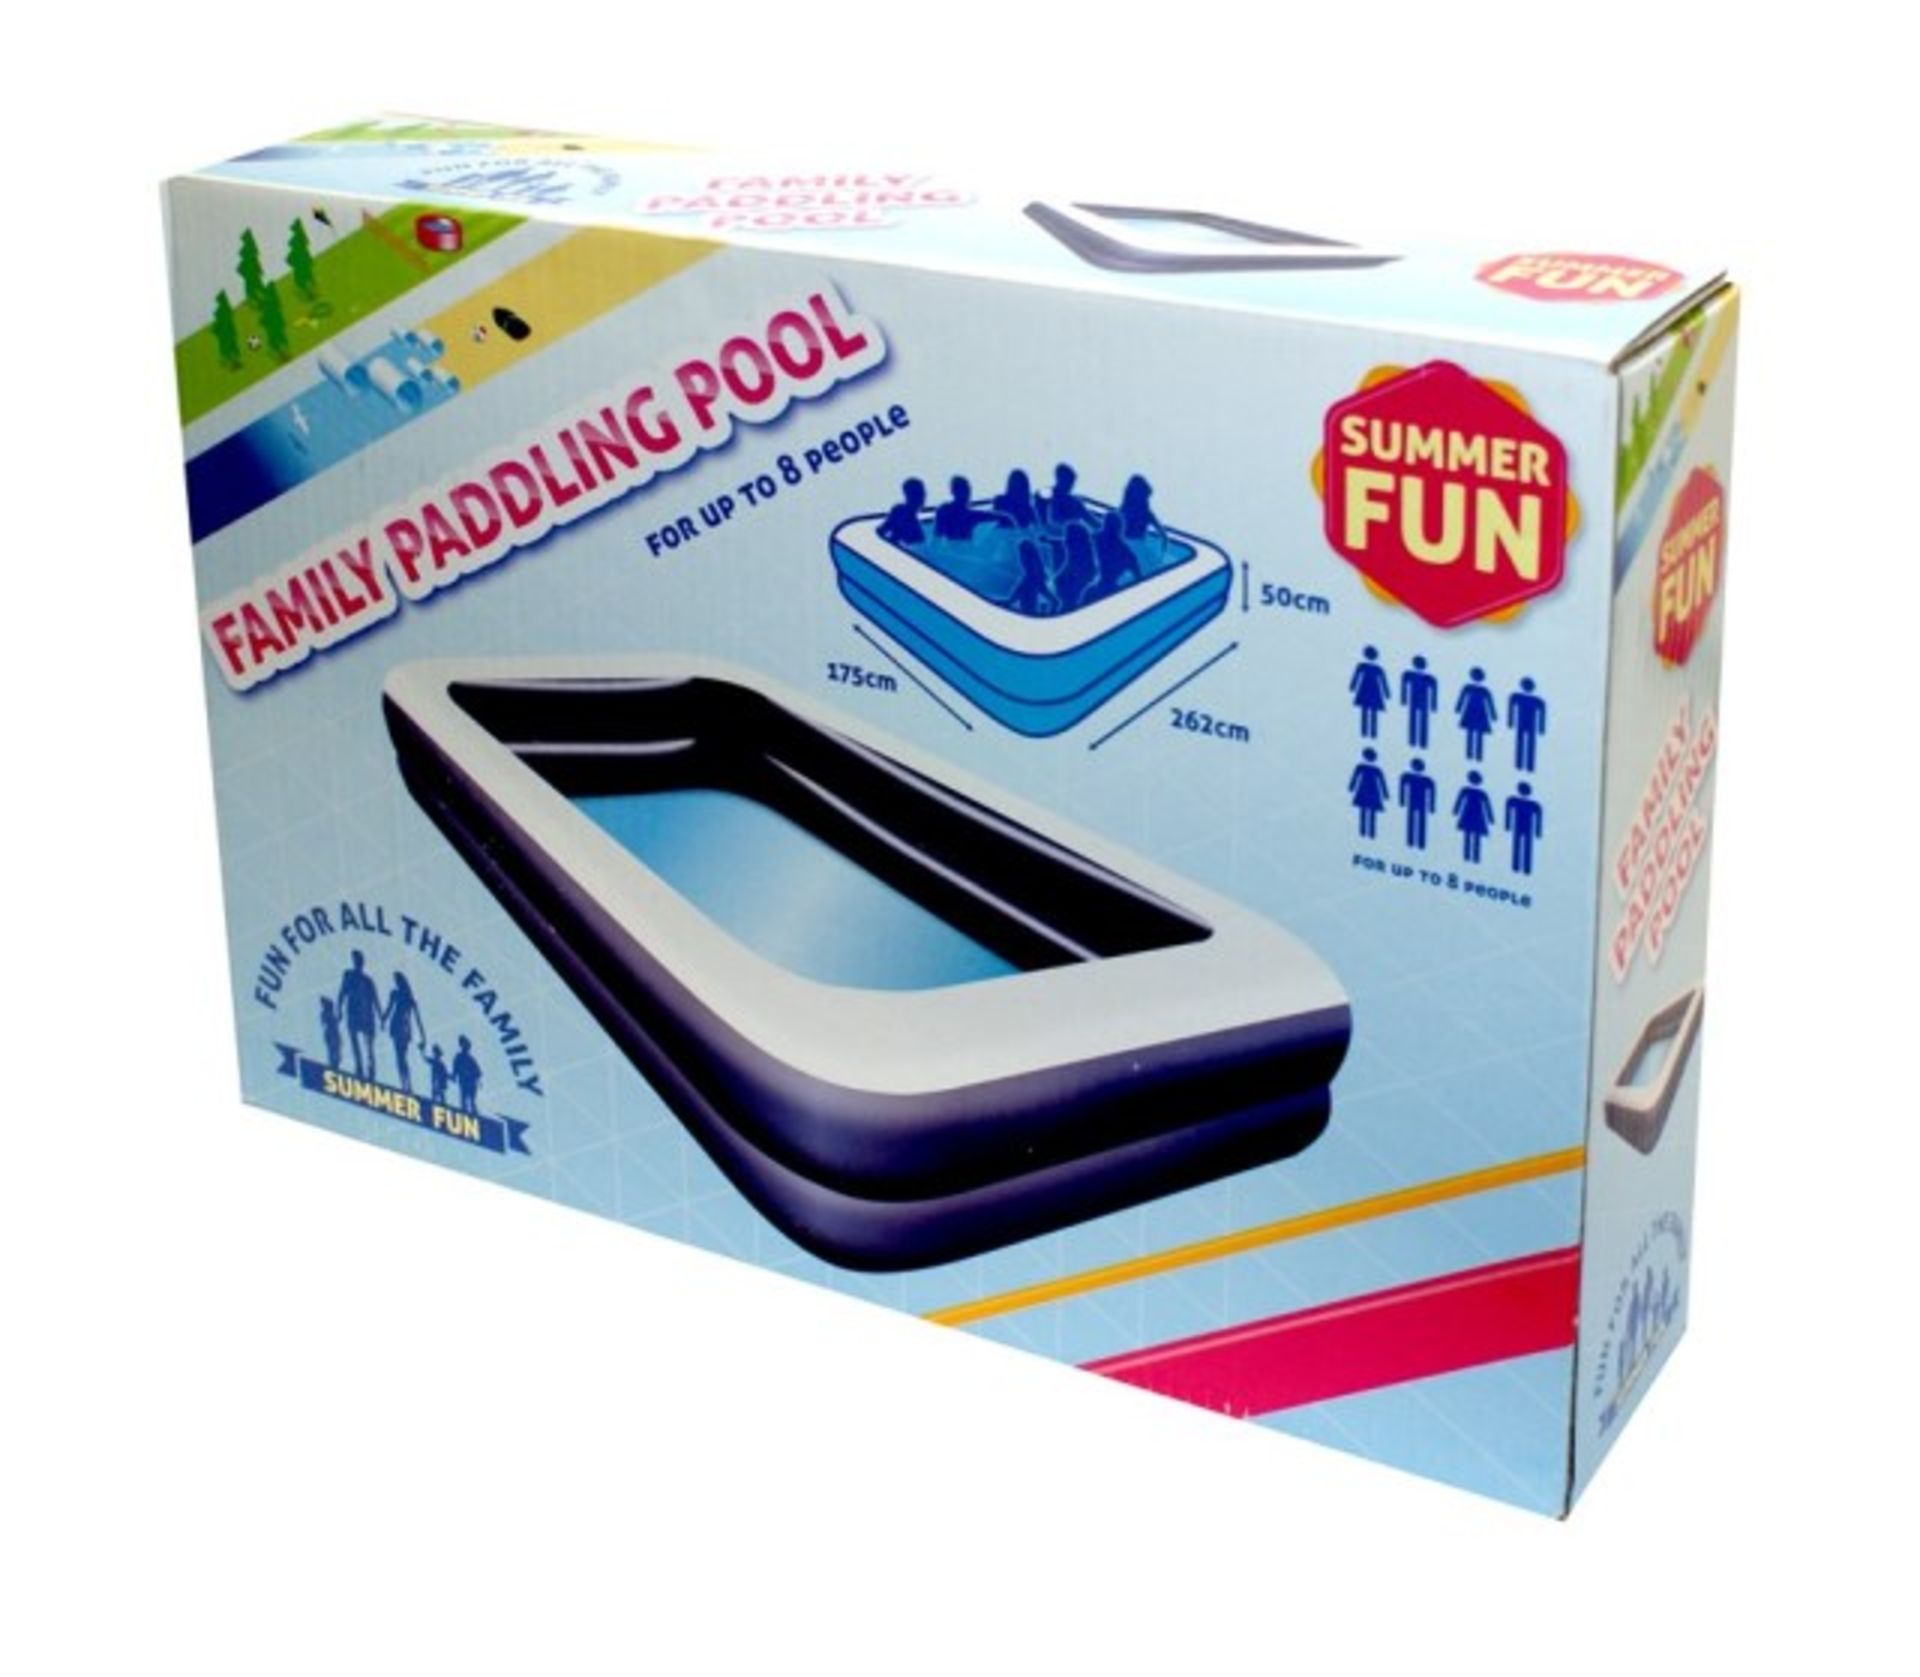 V *TRADE QTY* Brand New Family Paddling Pool 175x262x50cm X 5 YOUR BID PRICE TO BE MULTIPLIED BY - Image 2 of 2